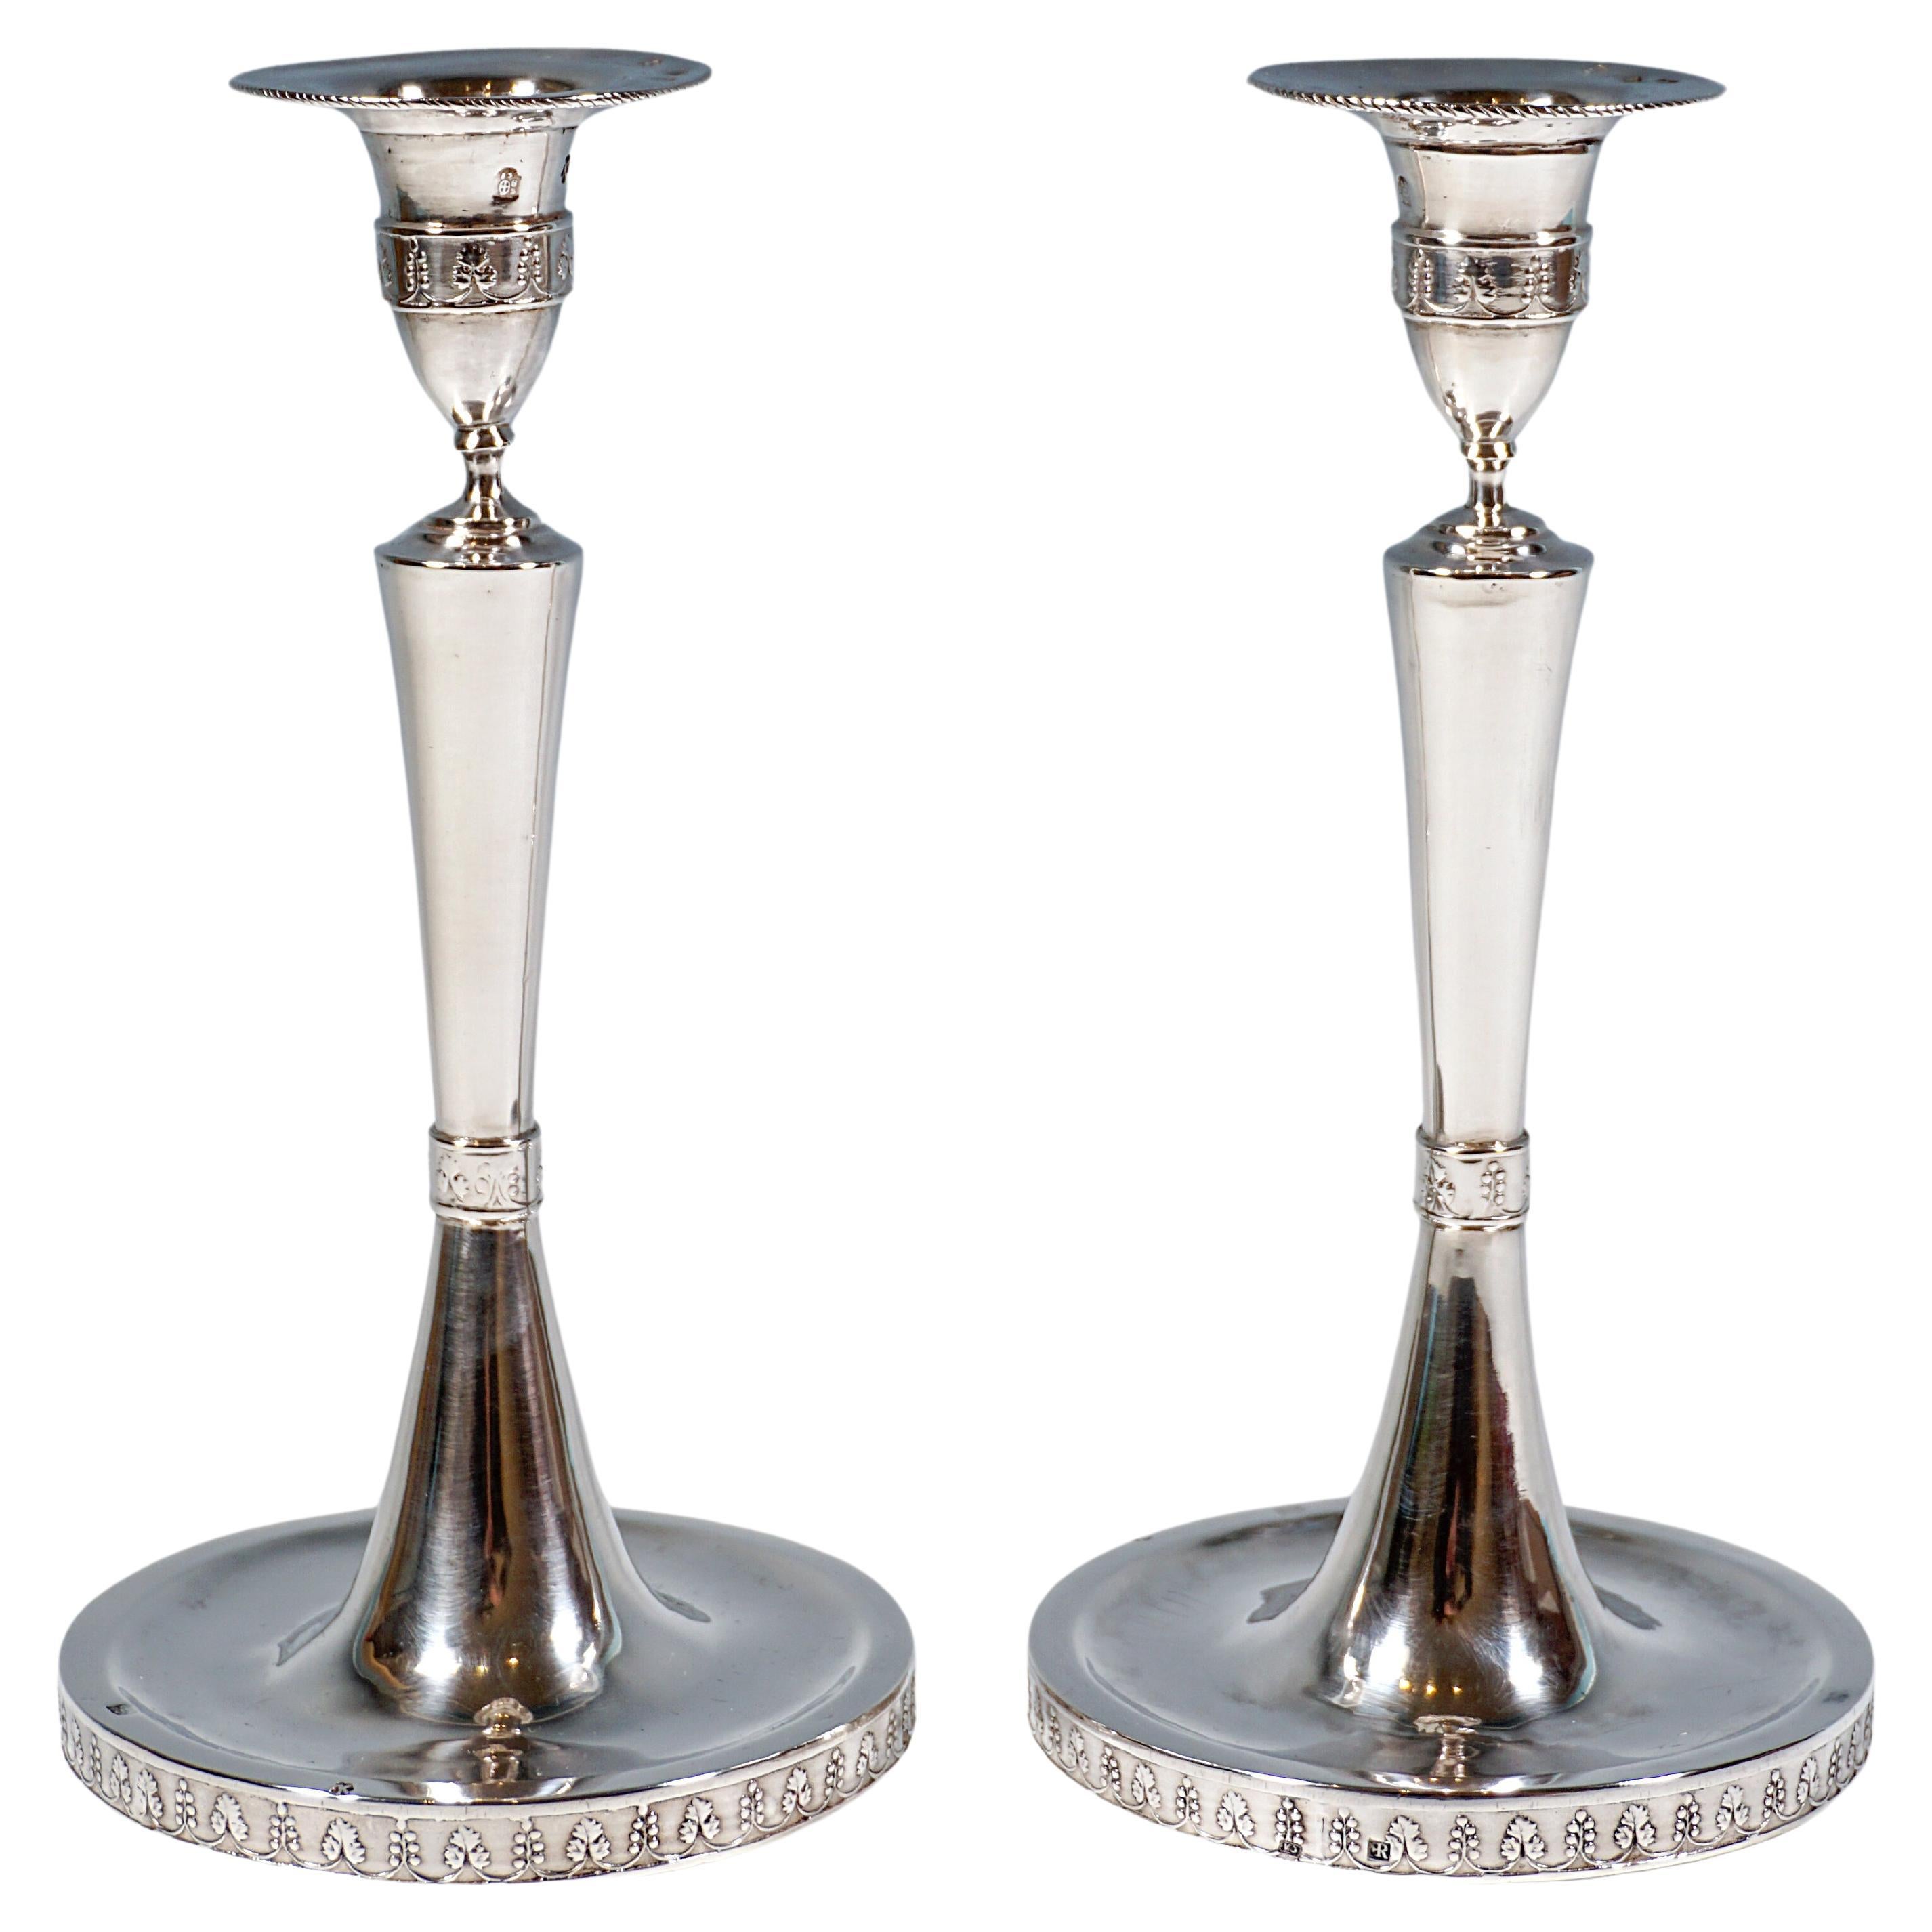 Pair Of Antique Empire Silver Candle Holders, Johann Kaba Vienna, Dated 1803 For Sale